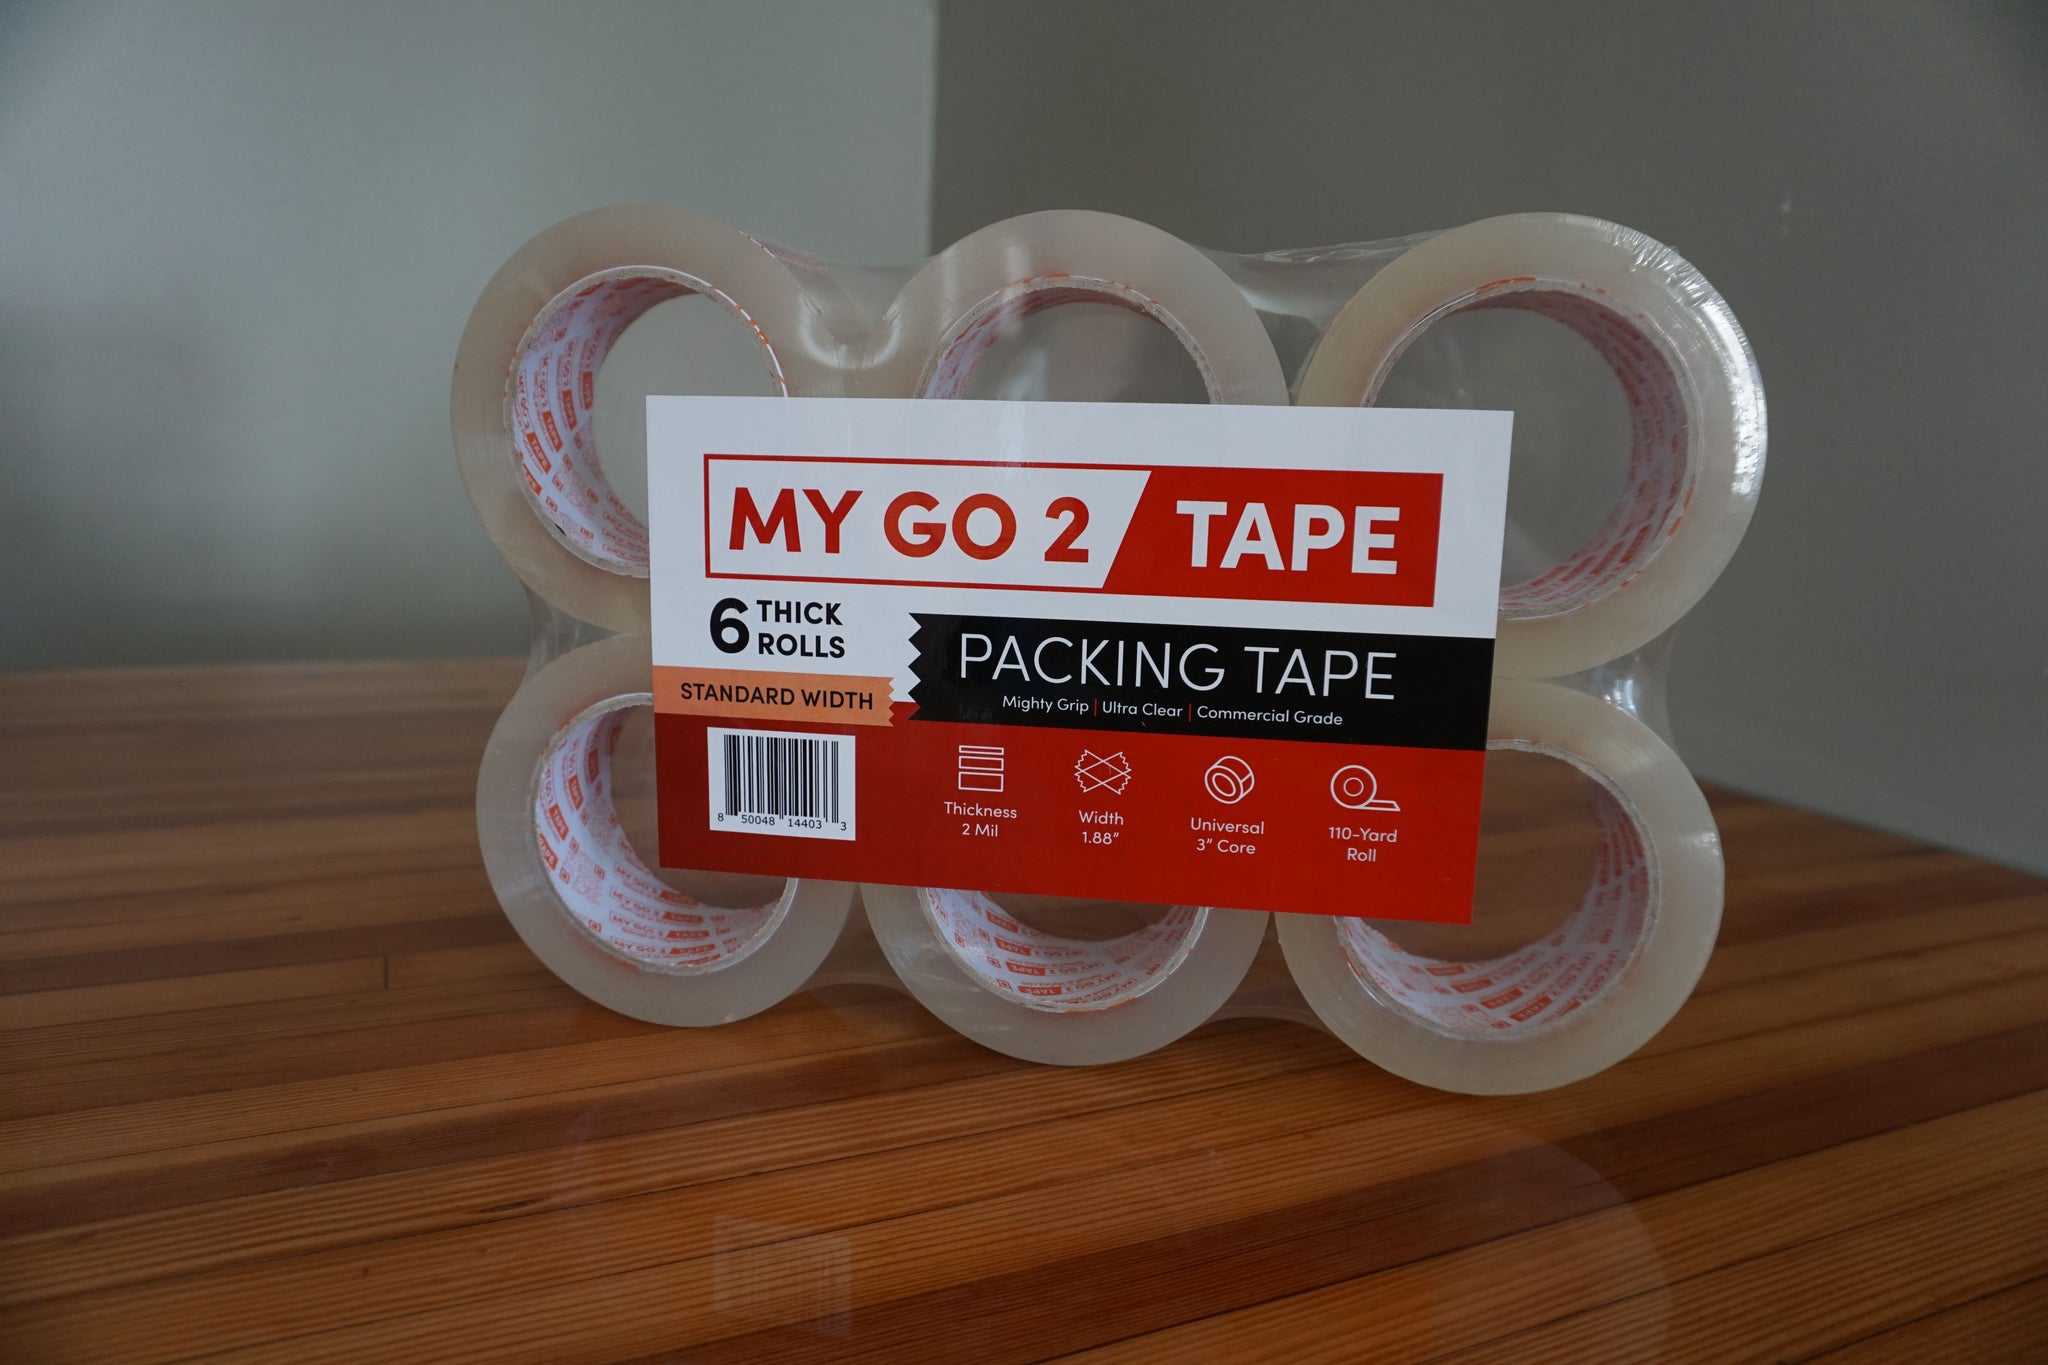 My Go 2 Packing Tape, 6 Pack, 110 Yard, 2.0 MIL, Standard Width, Ultra Clear